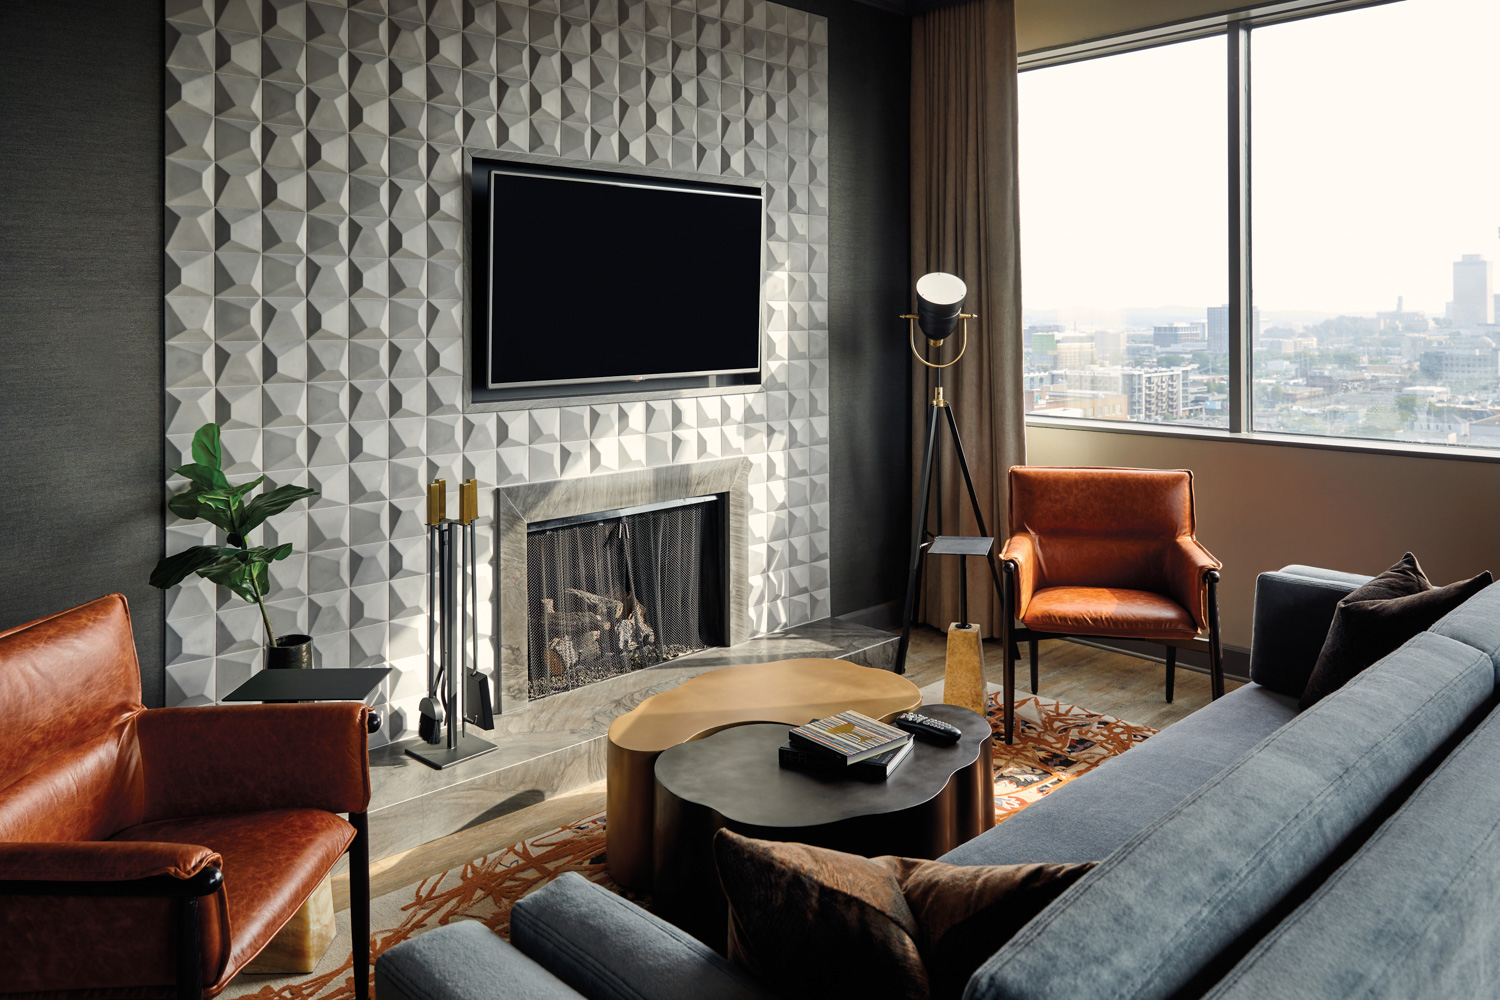 A sunlit living room with multi-dimension fireplace wall, upholstered furniture and working fireplace